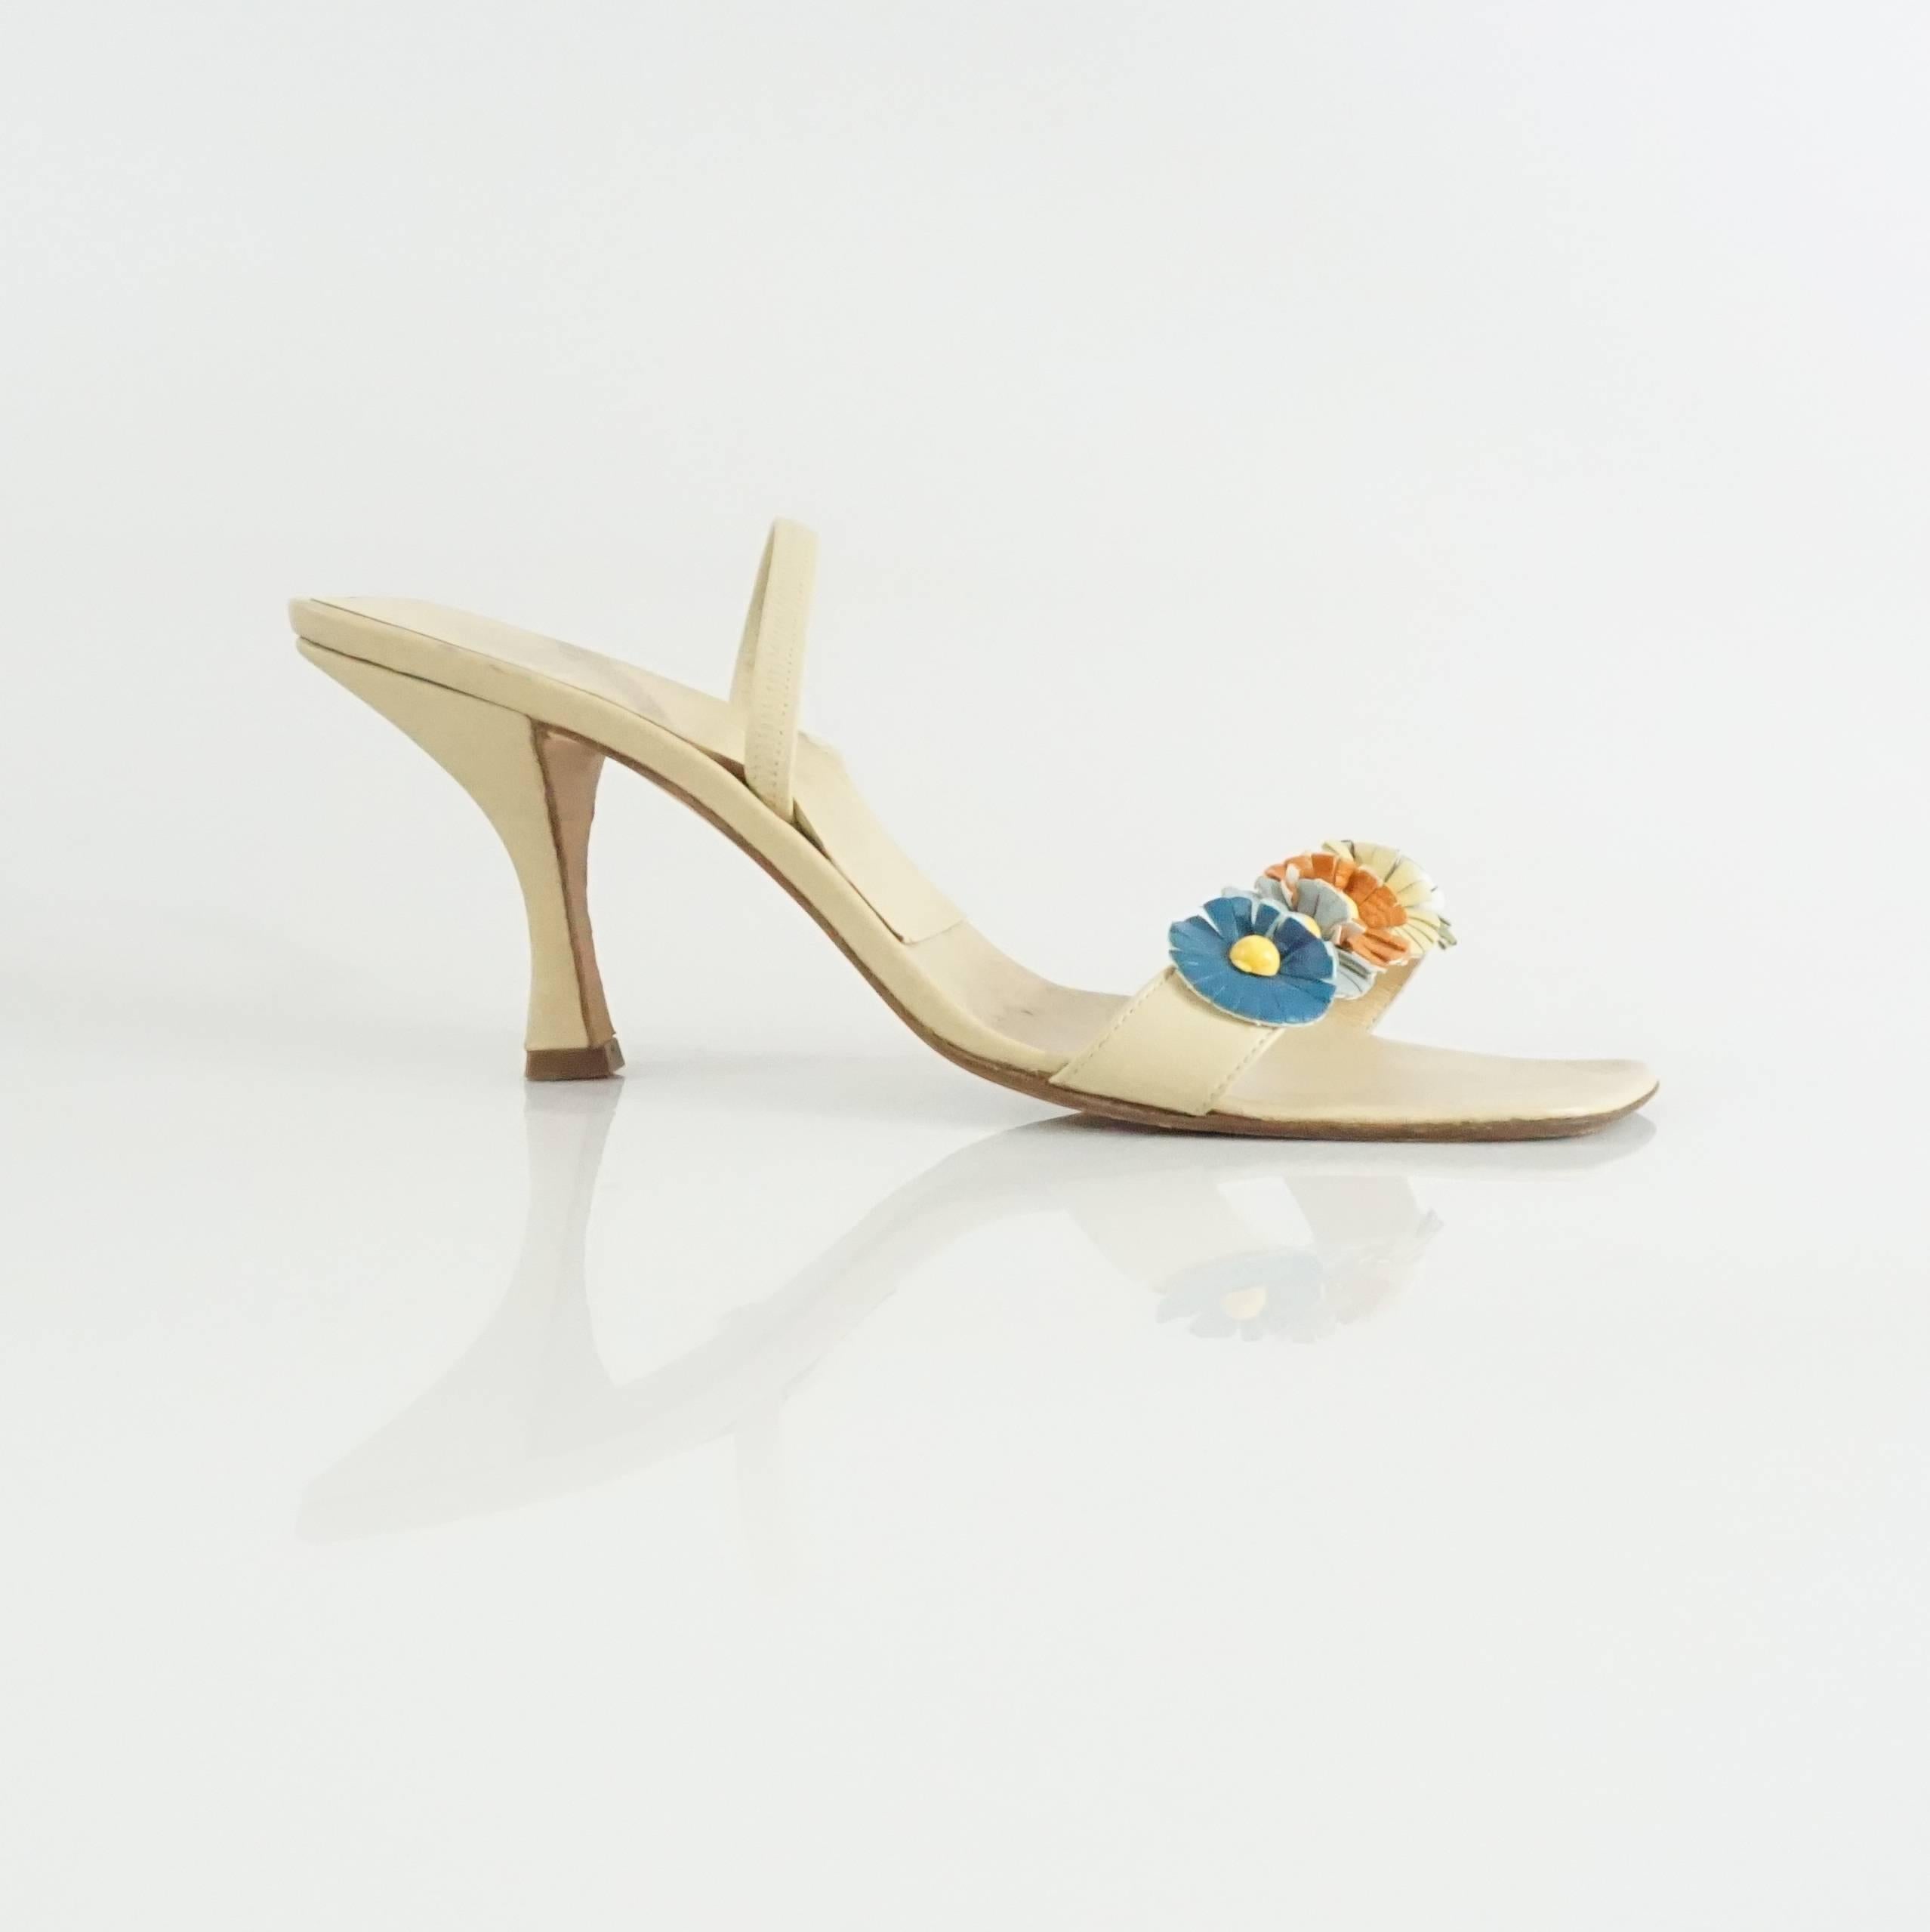 These Fendi sandals are beige leather with five multi colored leather flowers with yellow centers on the toe strap. There is another strap to help keep the sandal on and an angular toe bed. These shoes are in good condition with minor wear on the